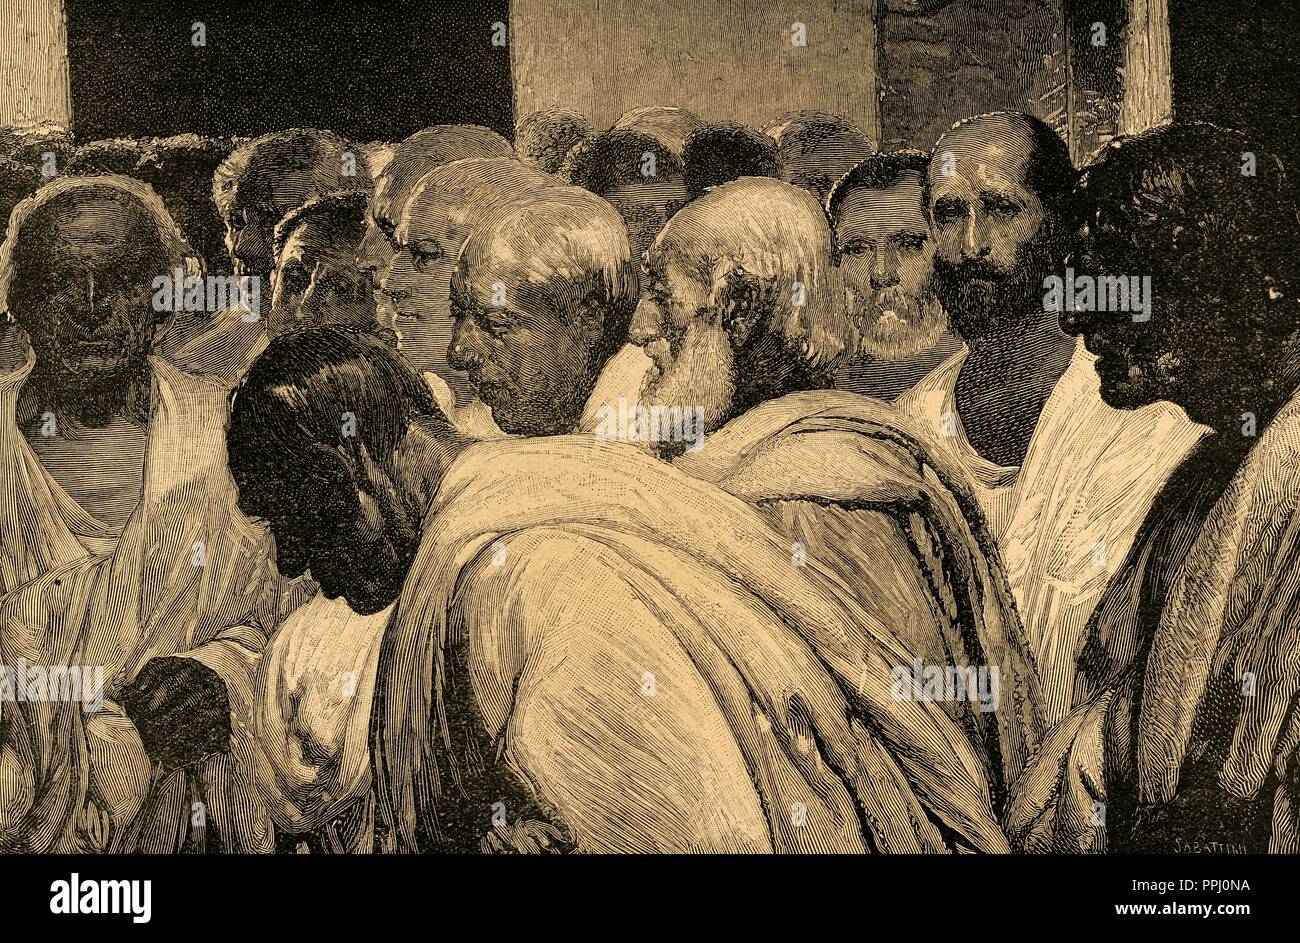 Appius Claudius the Censor (340-273 BC). Roman Censor. Engraving by Sabattini after a fresco by Cesare Maccari. The Iberian Illustration, 1898. Stock Photo